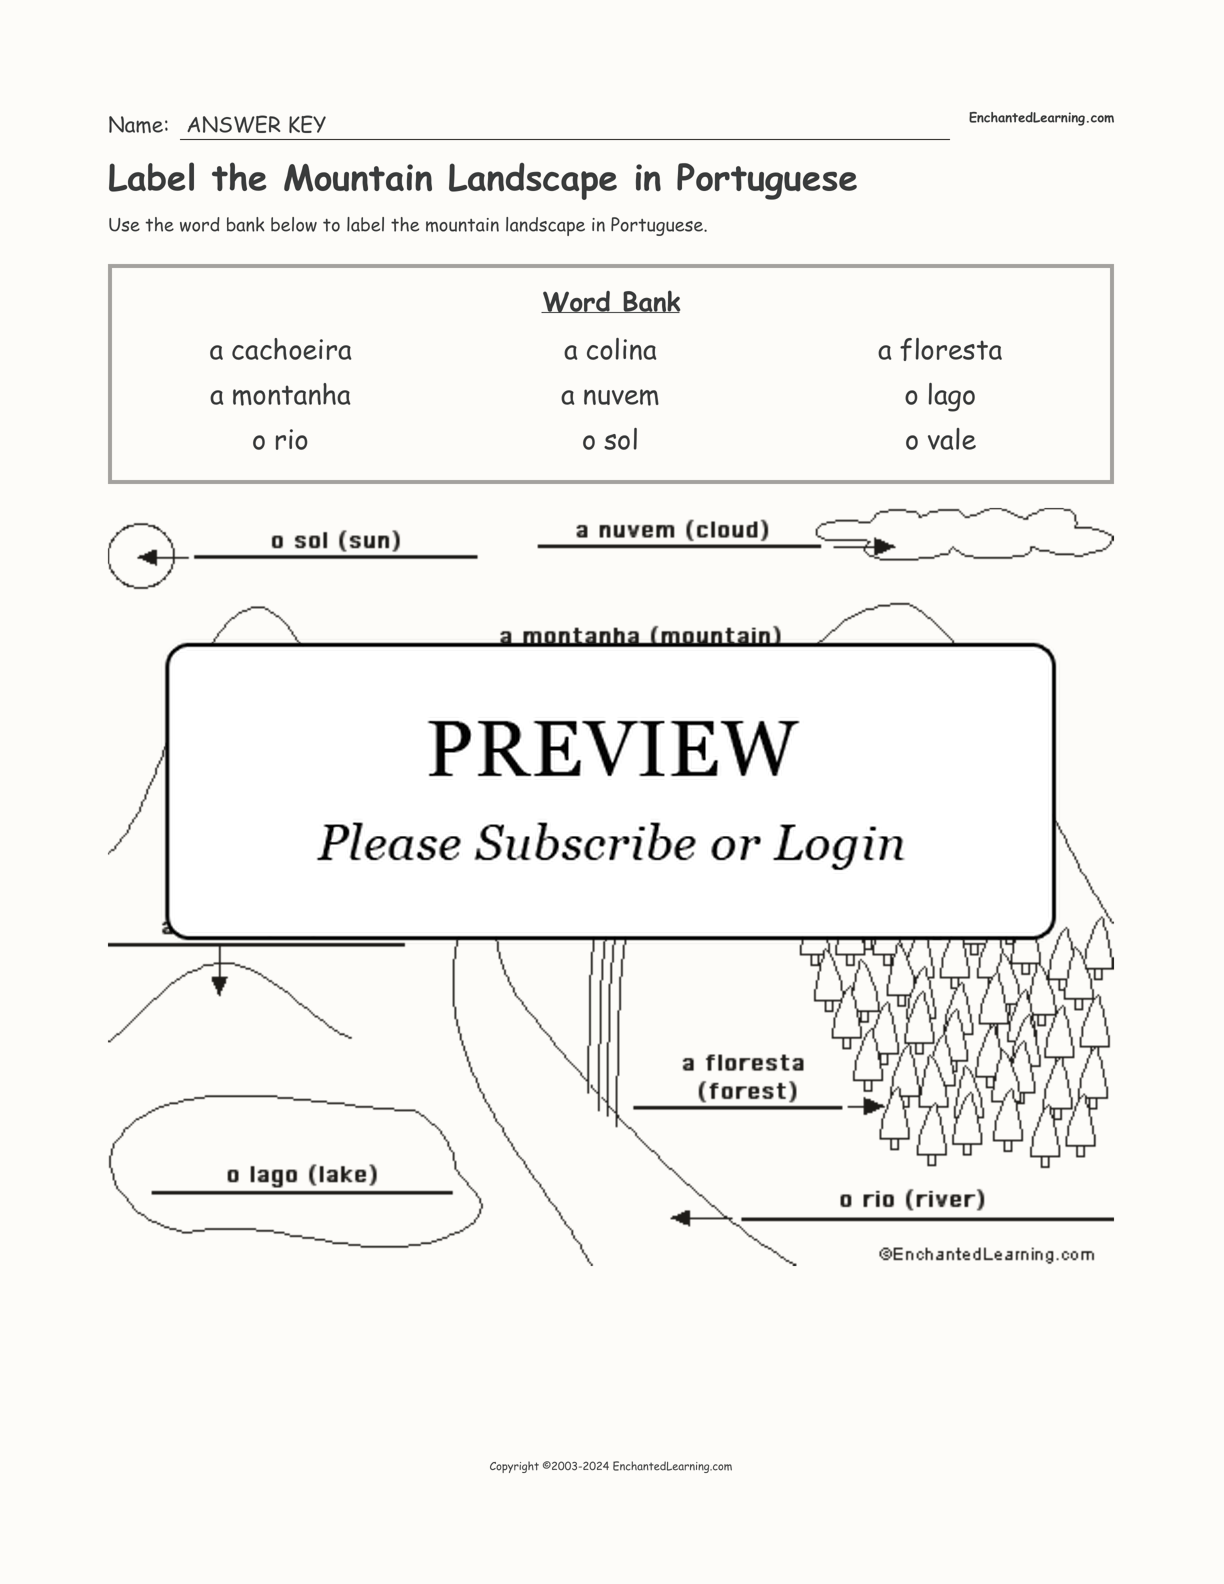 Label the Mountain Landscape in Portuguese interactive worksheet page 2